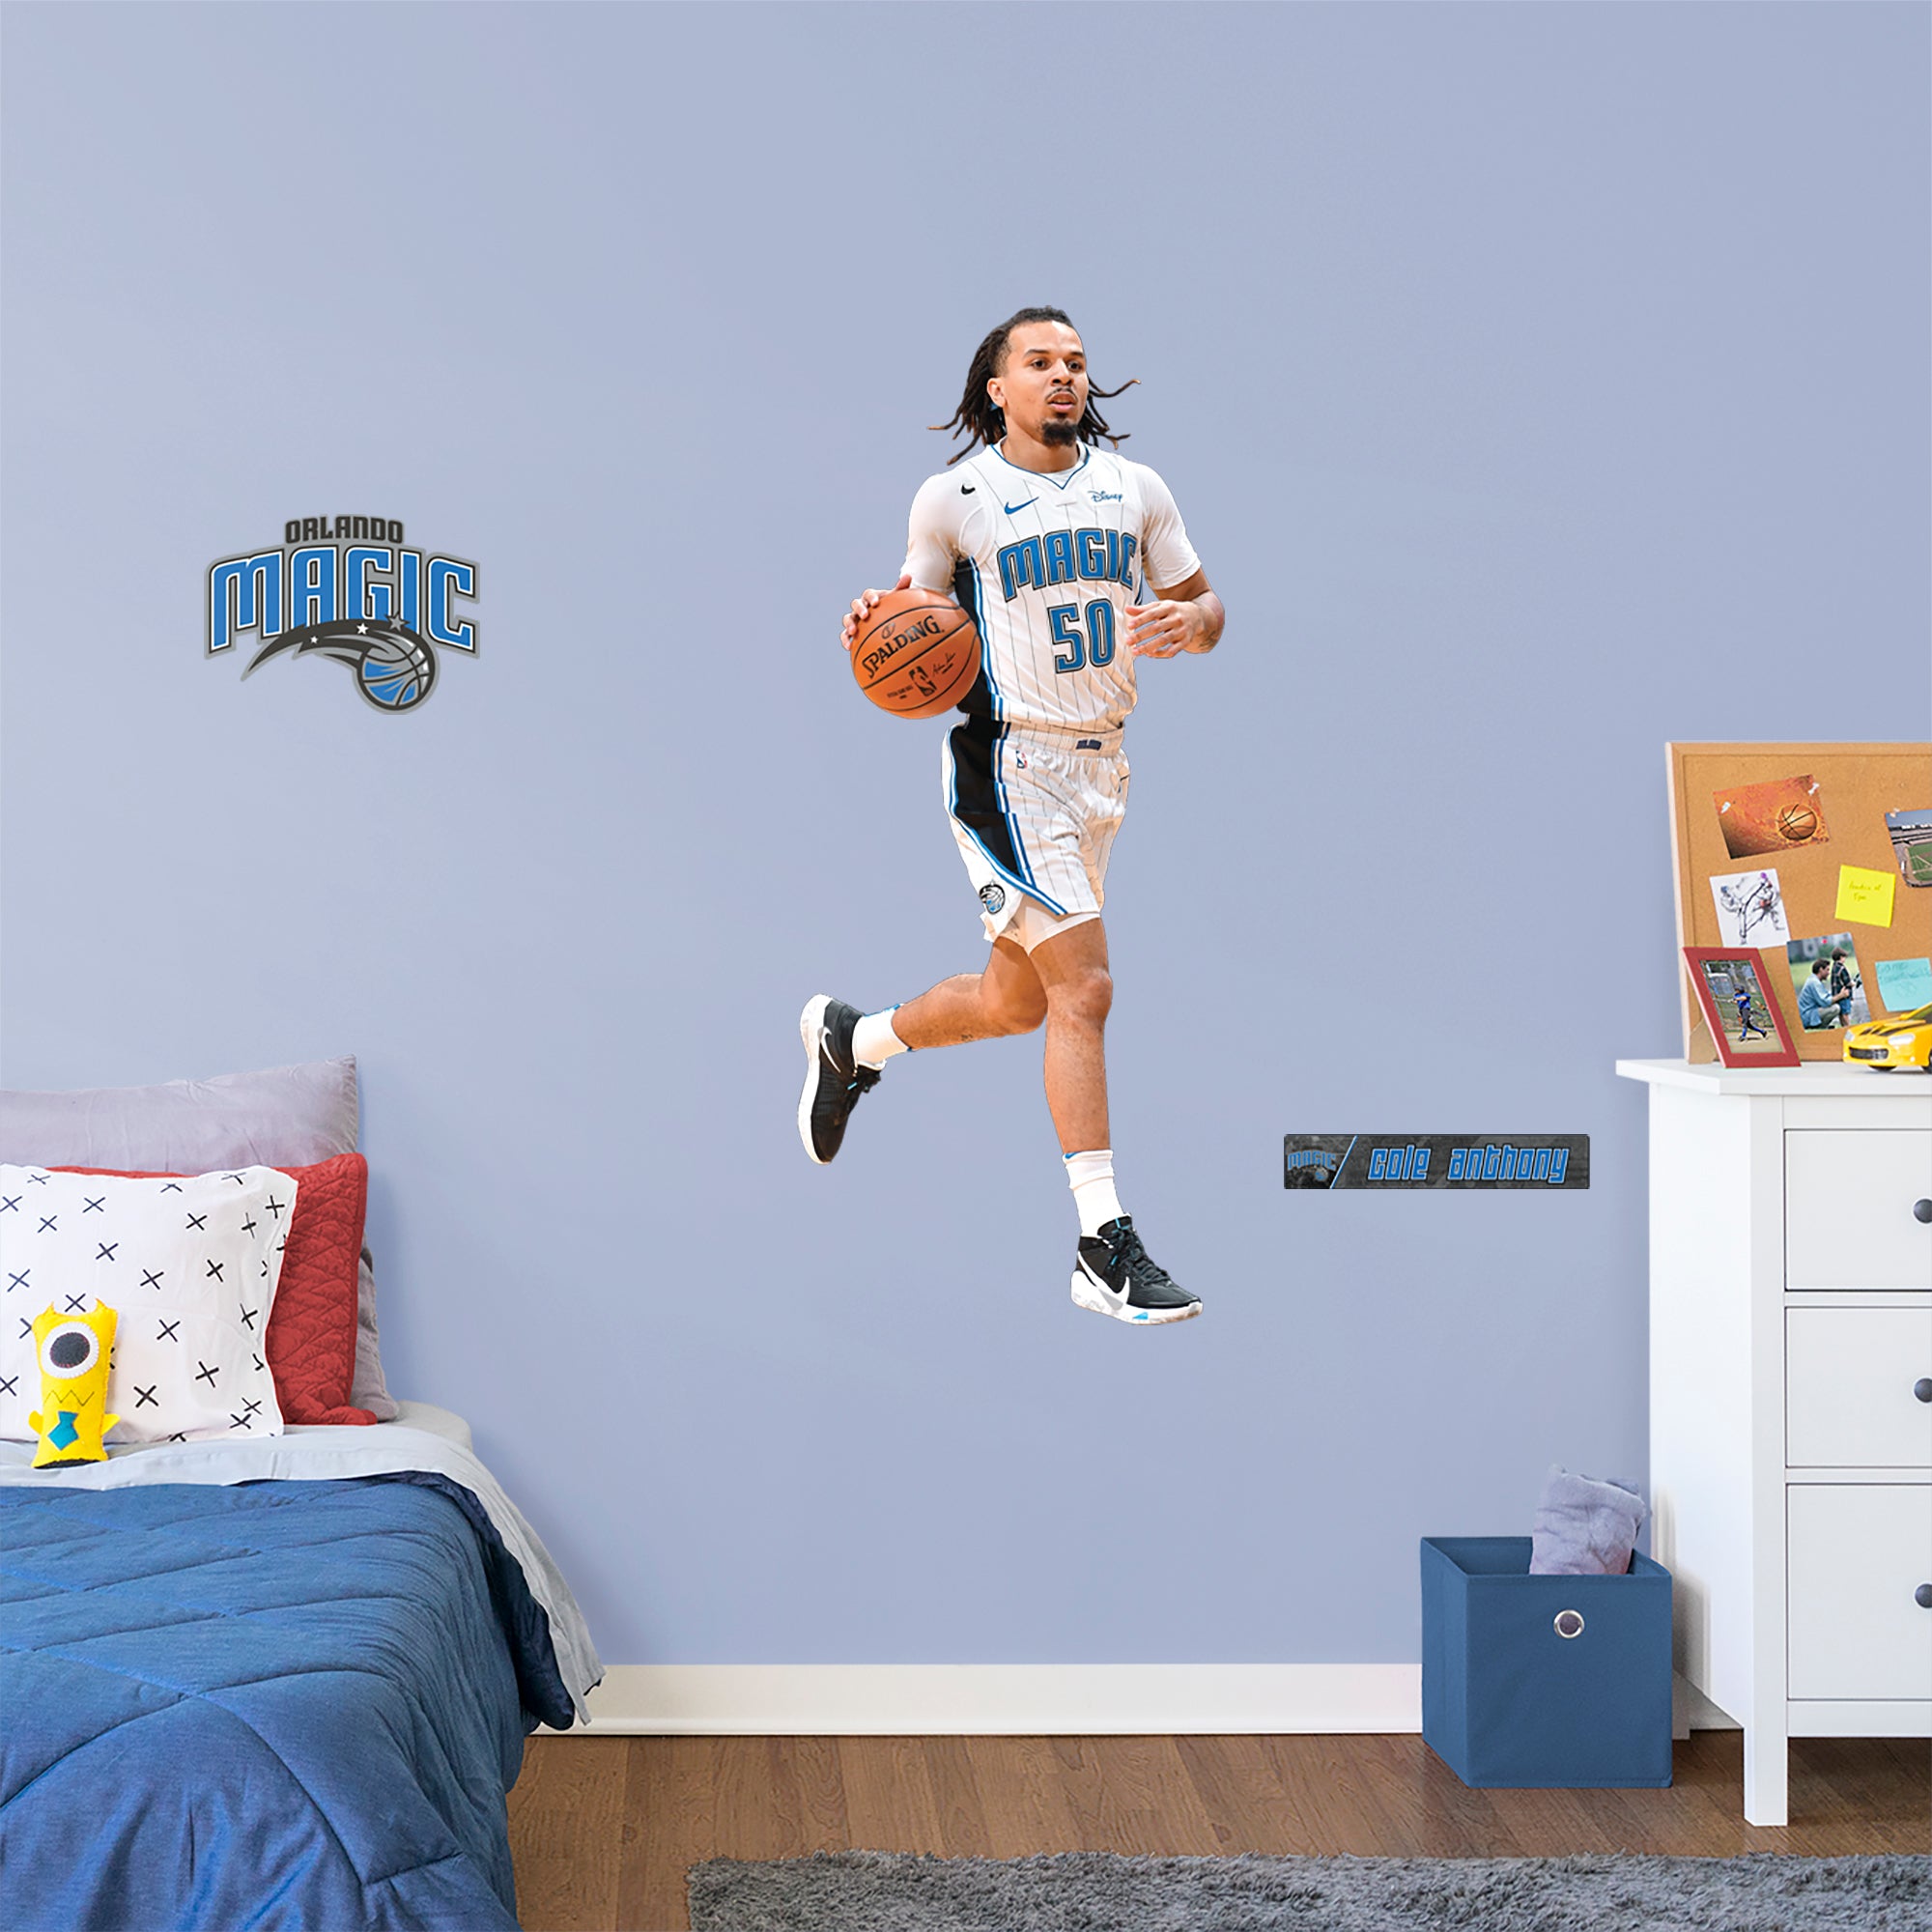 Cole Anthony 2020 - Officially Licensed NBA Removable Wall Decal Giant Athlete + 2 Decals (21"W x 51"H) by Fathead | Vinyl